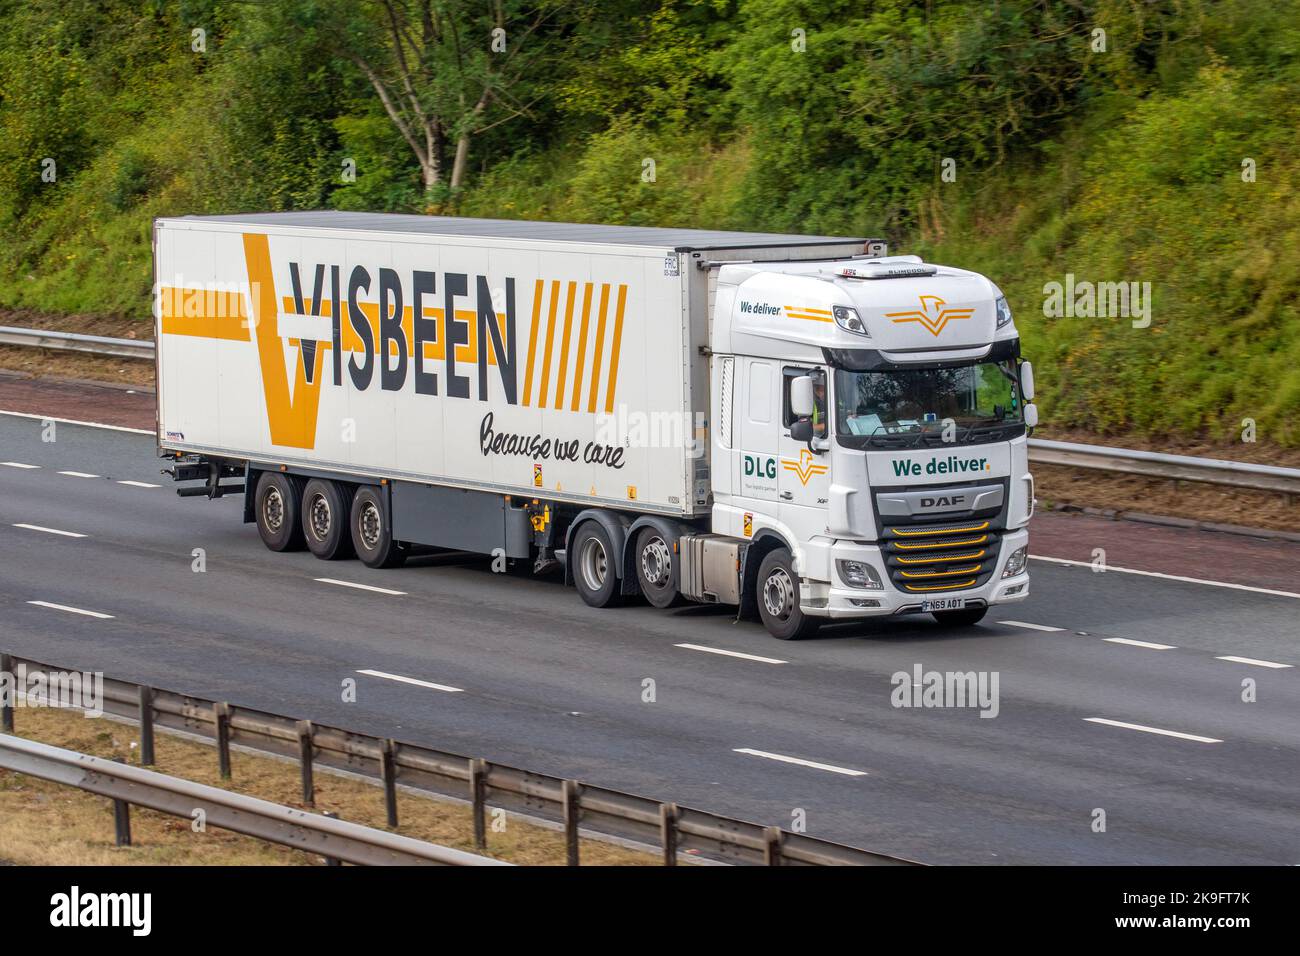 DLG VISBEEN 'Because We Care' carrier DAF XF 12902cc Diesel truck multi-axle articulated lorry travelling on the M6 motorway UK Stock Photo